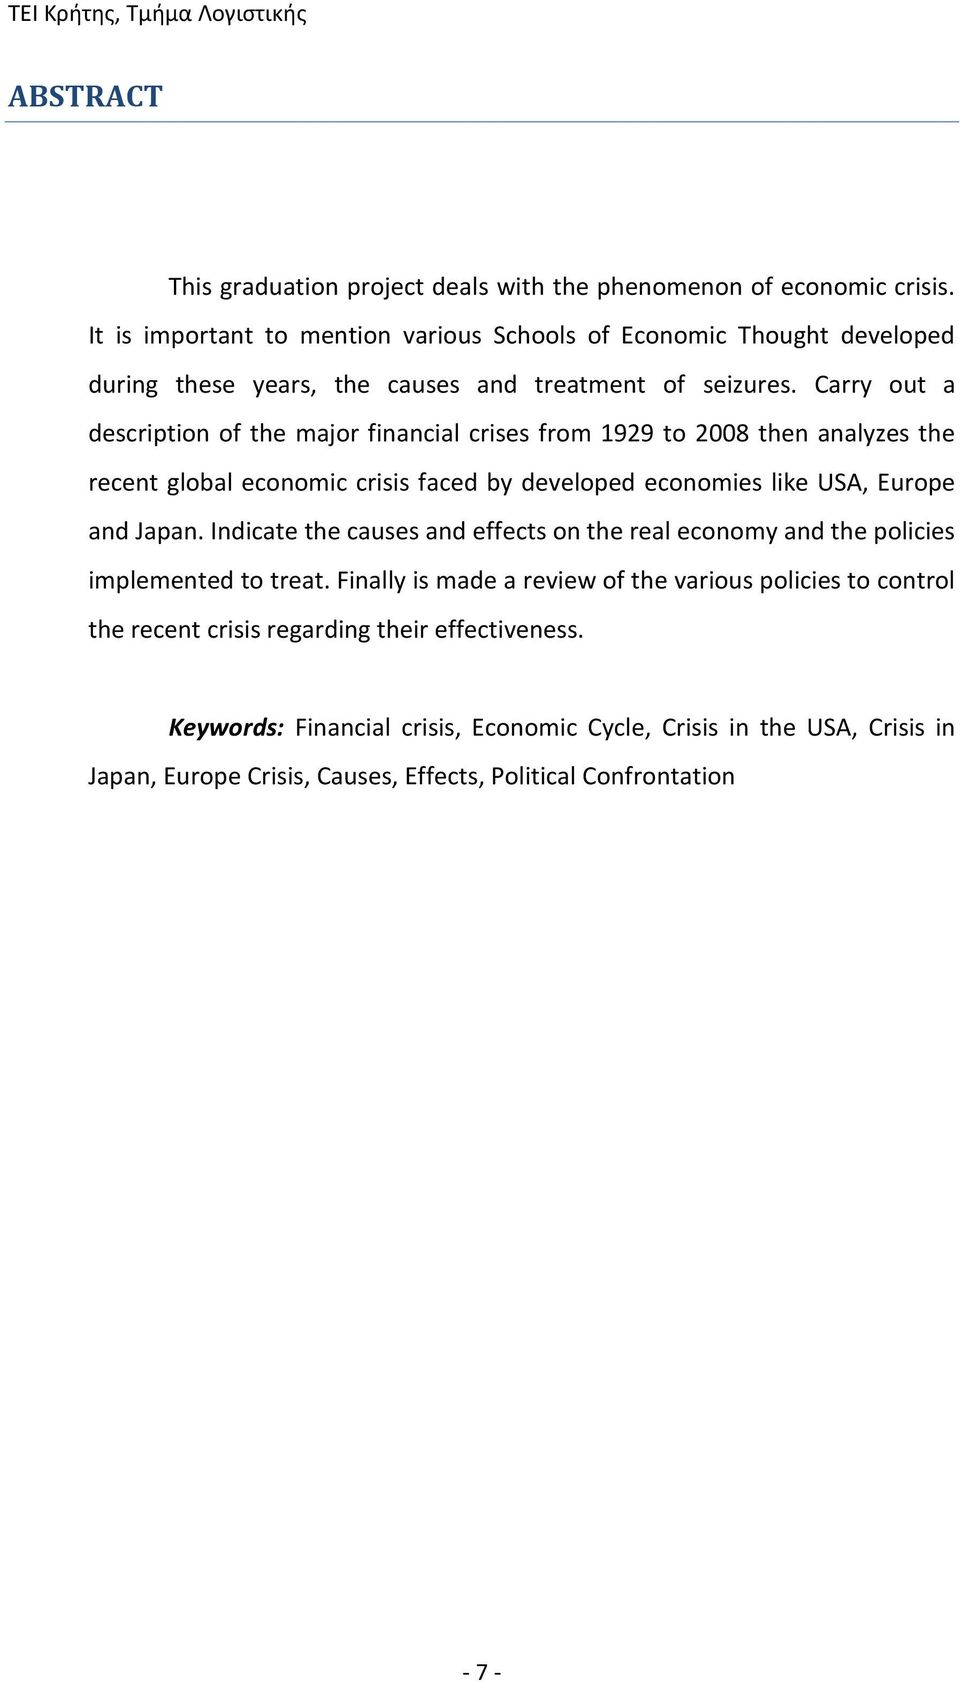 Carry out a description of the major financial crises from 1929 to 2008 then analyzes the recent global economic crisis faced by developed economies like USA, Europe and Japan.